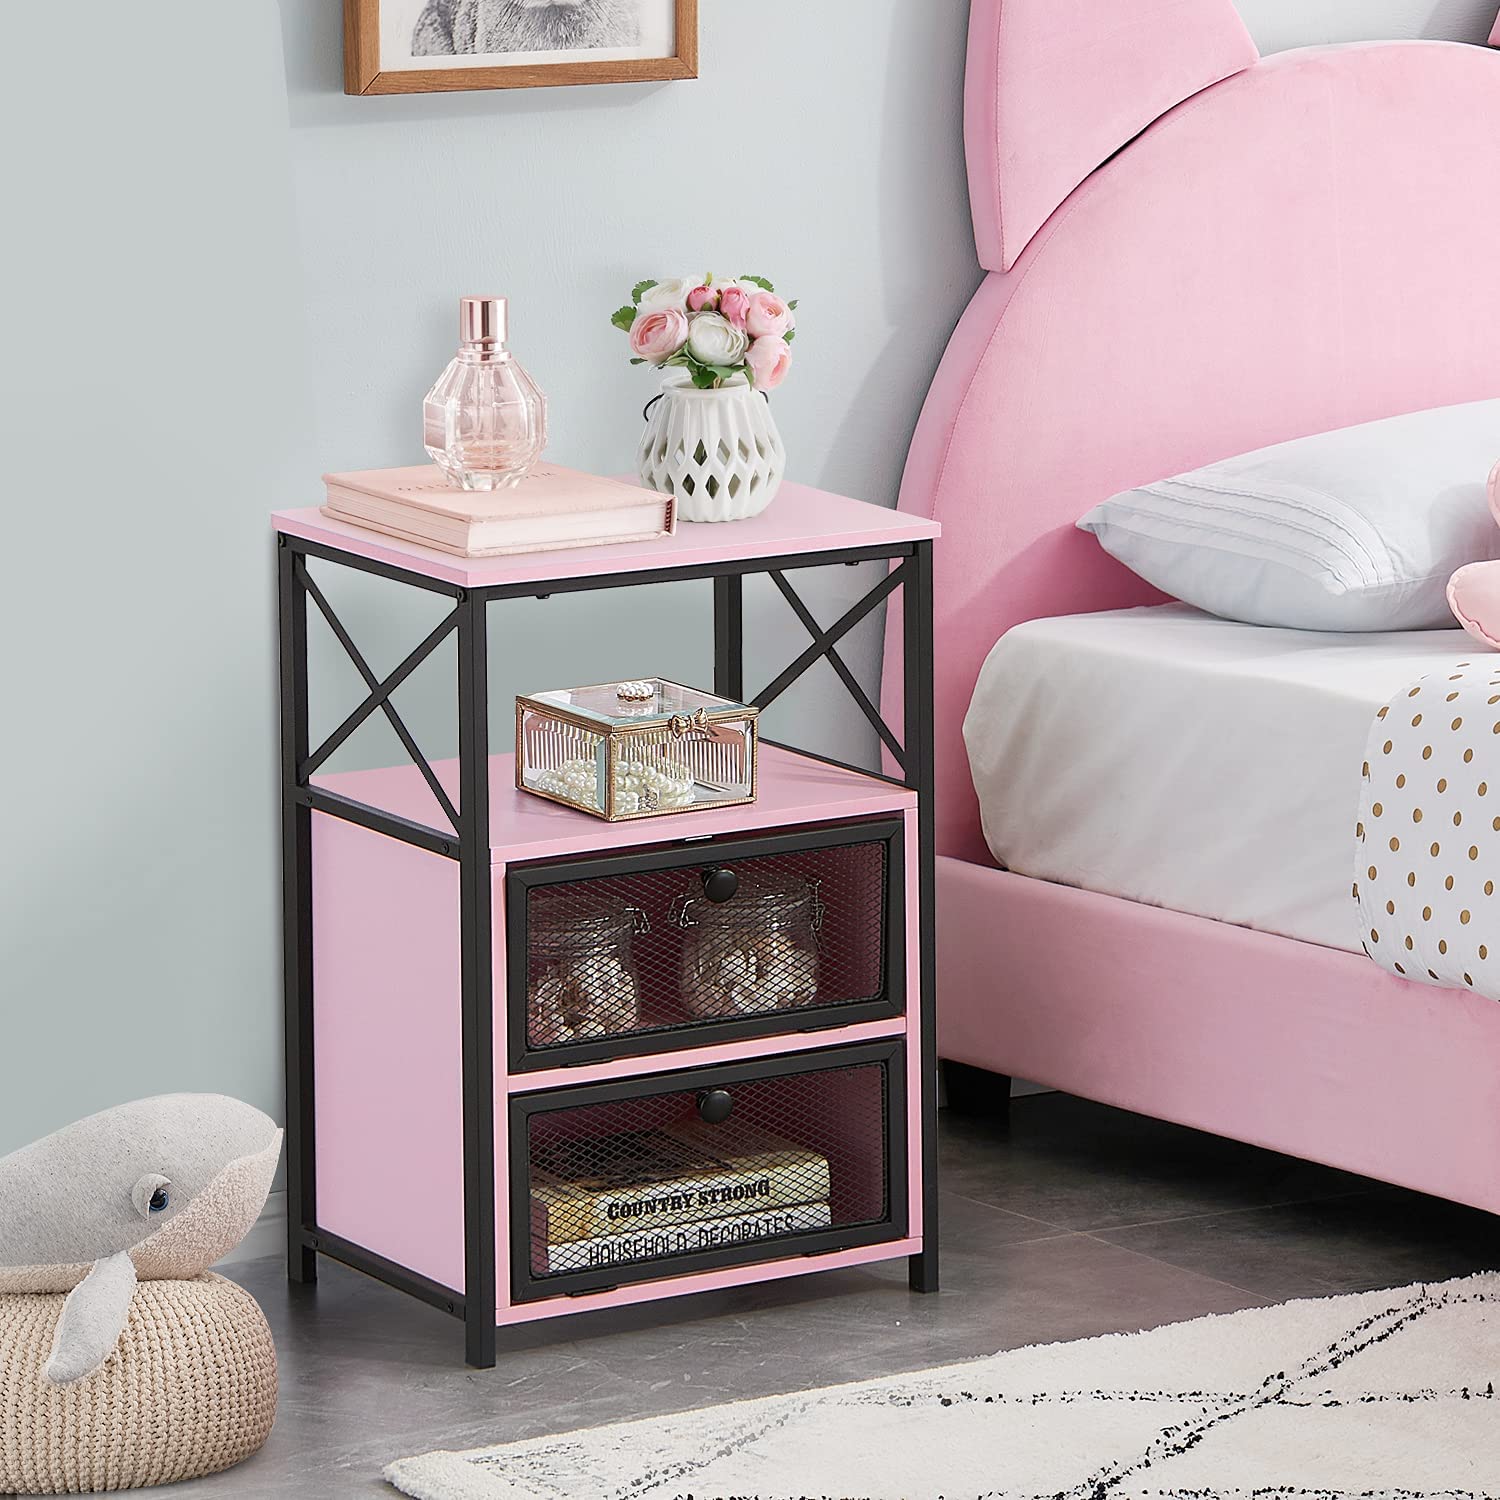 Modern NightStand with Storage Space and Door